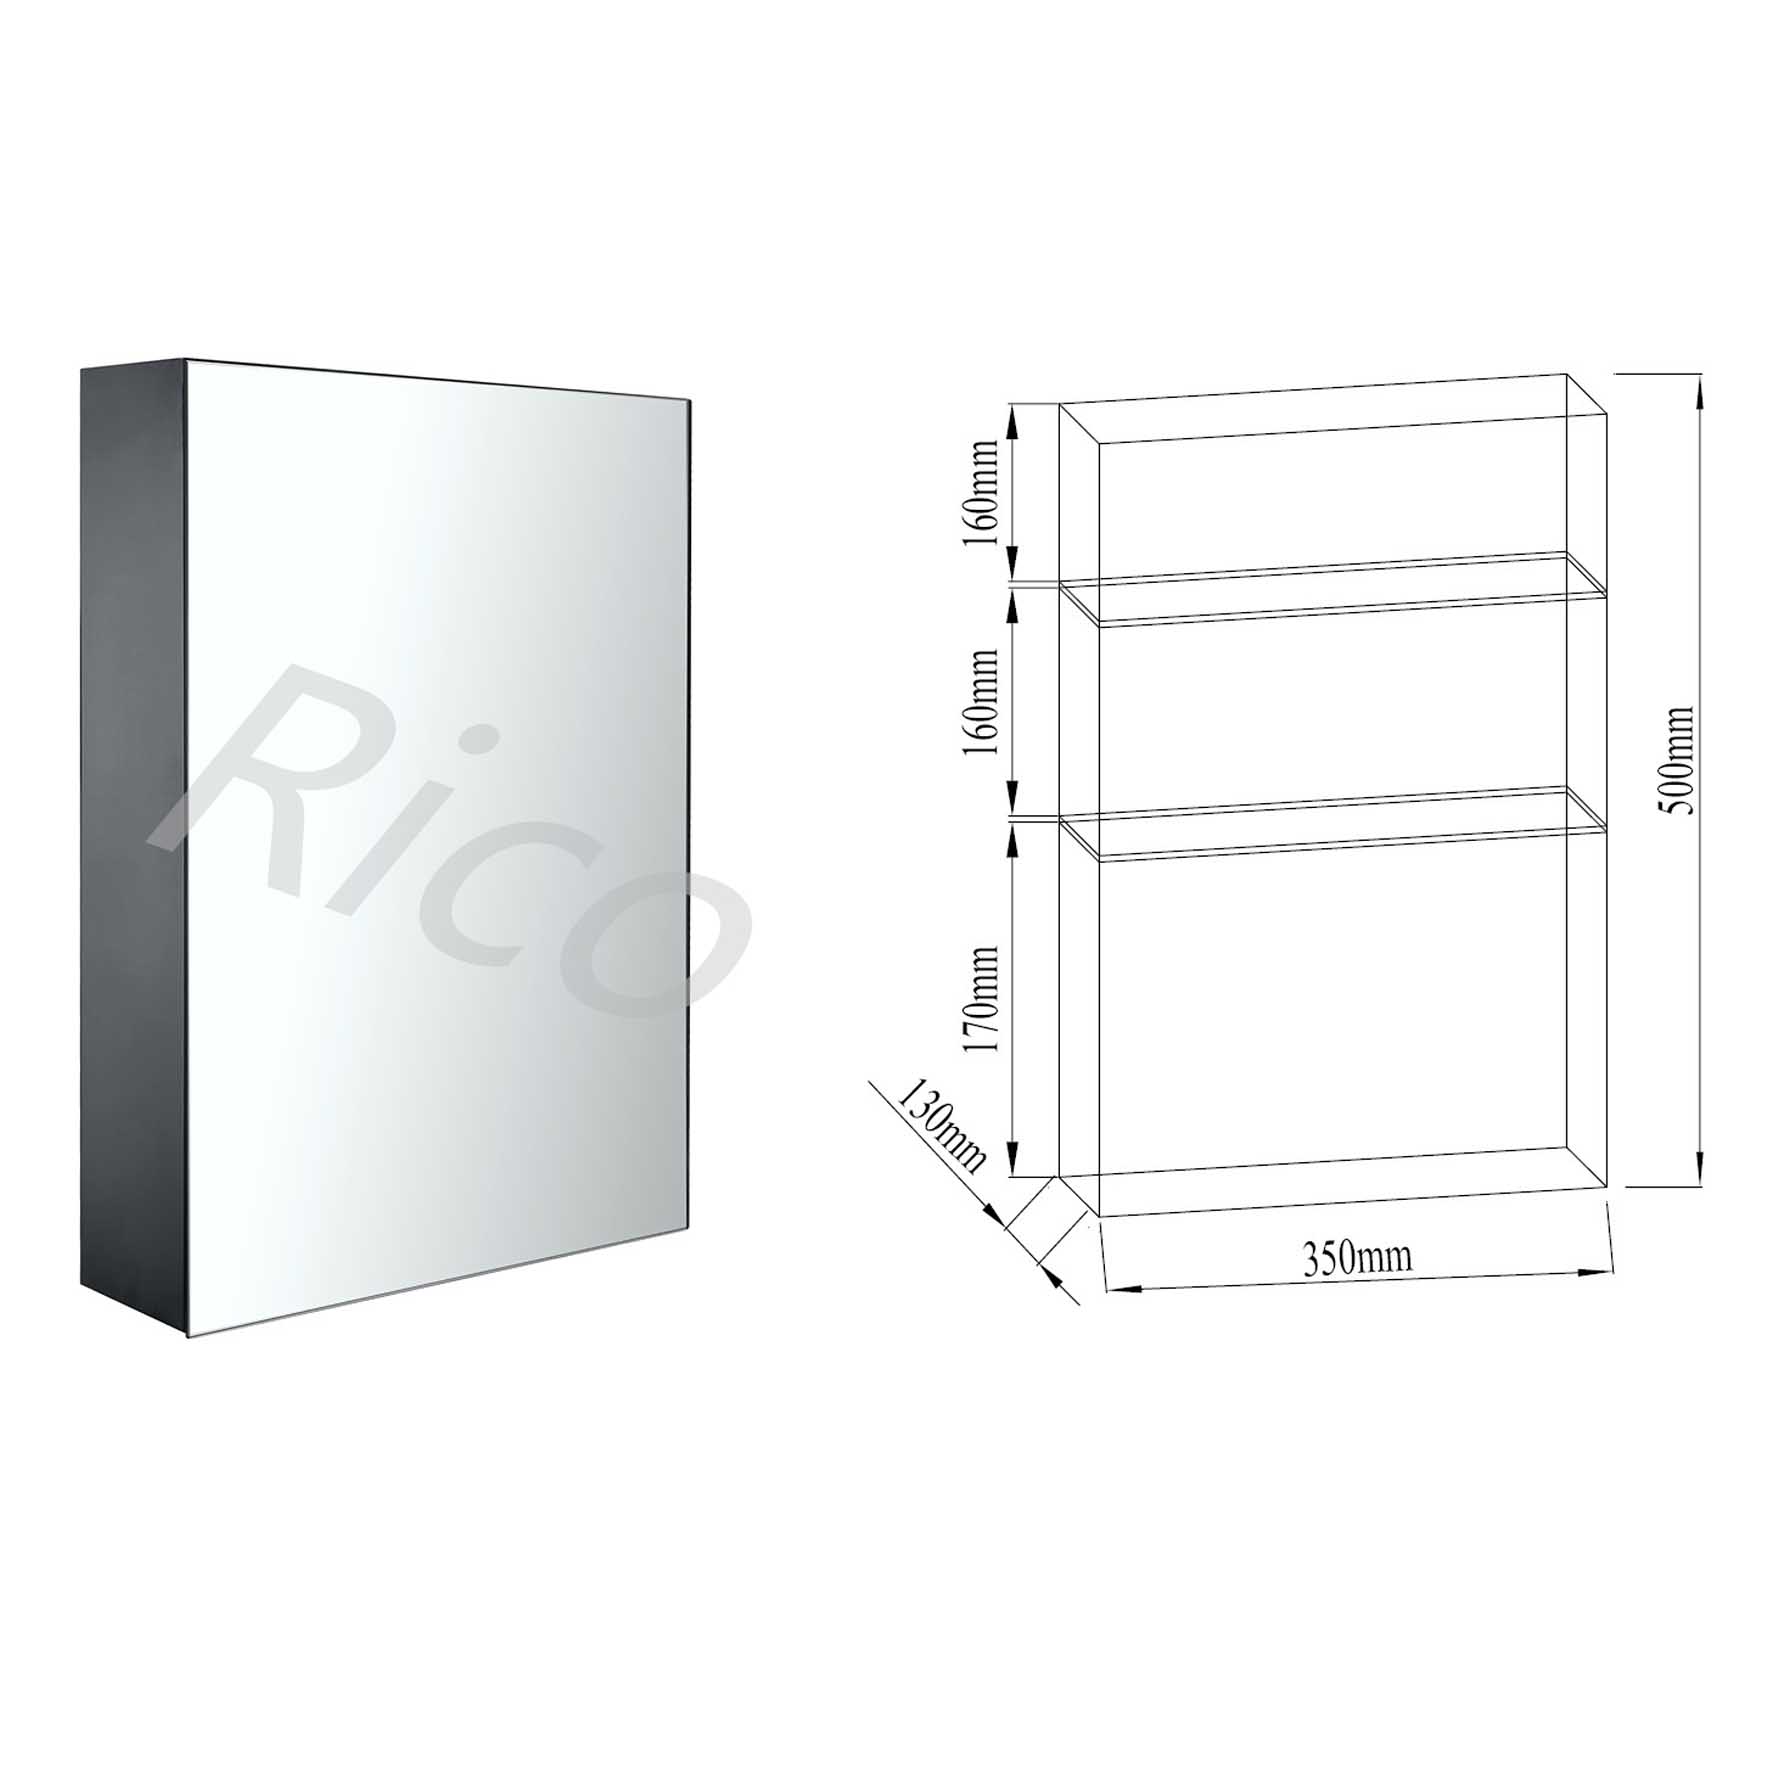 Rico : Stainless Steel Mirror Cabinet (Black) – RICO-A35504